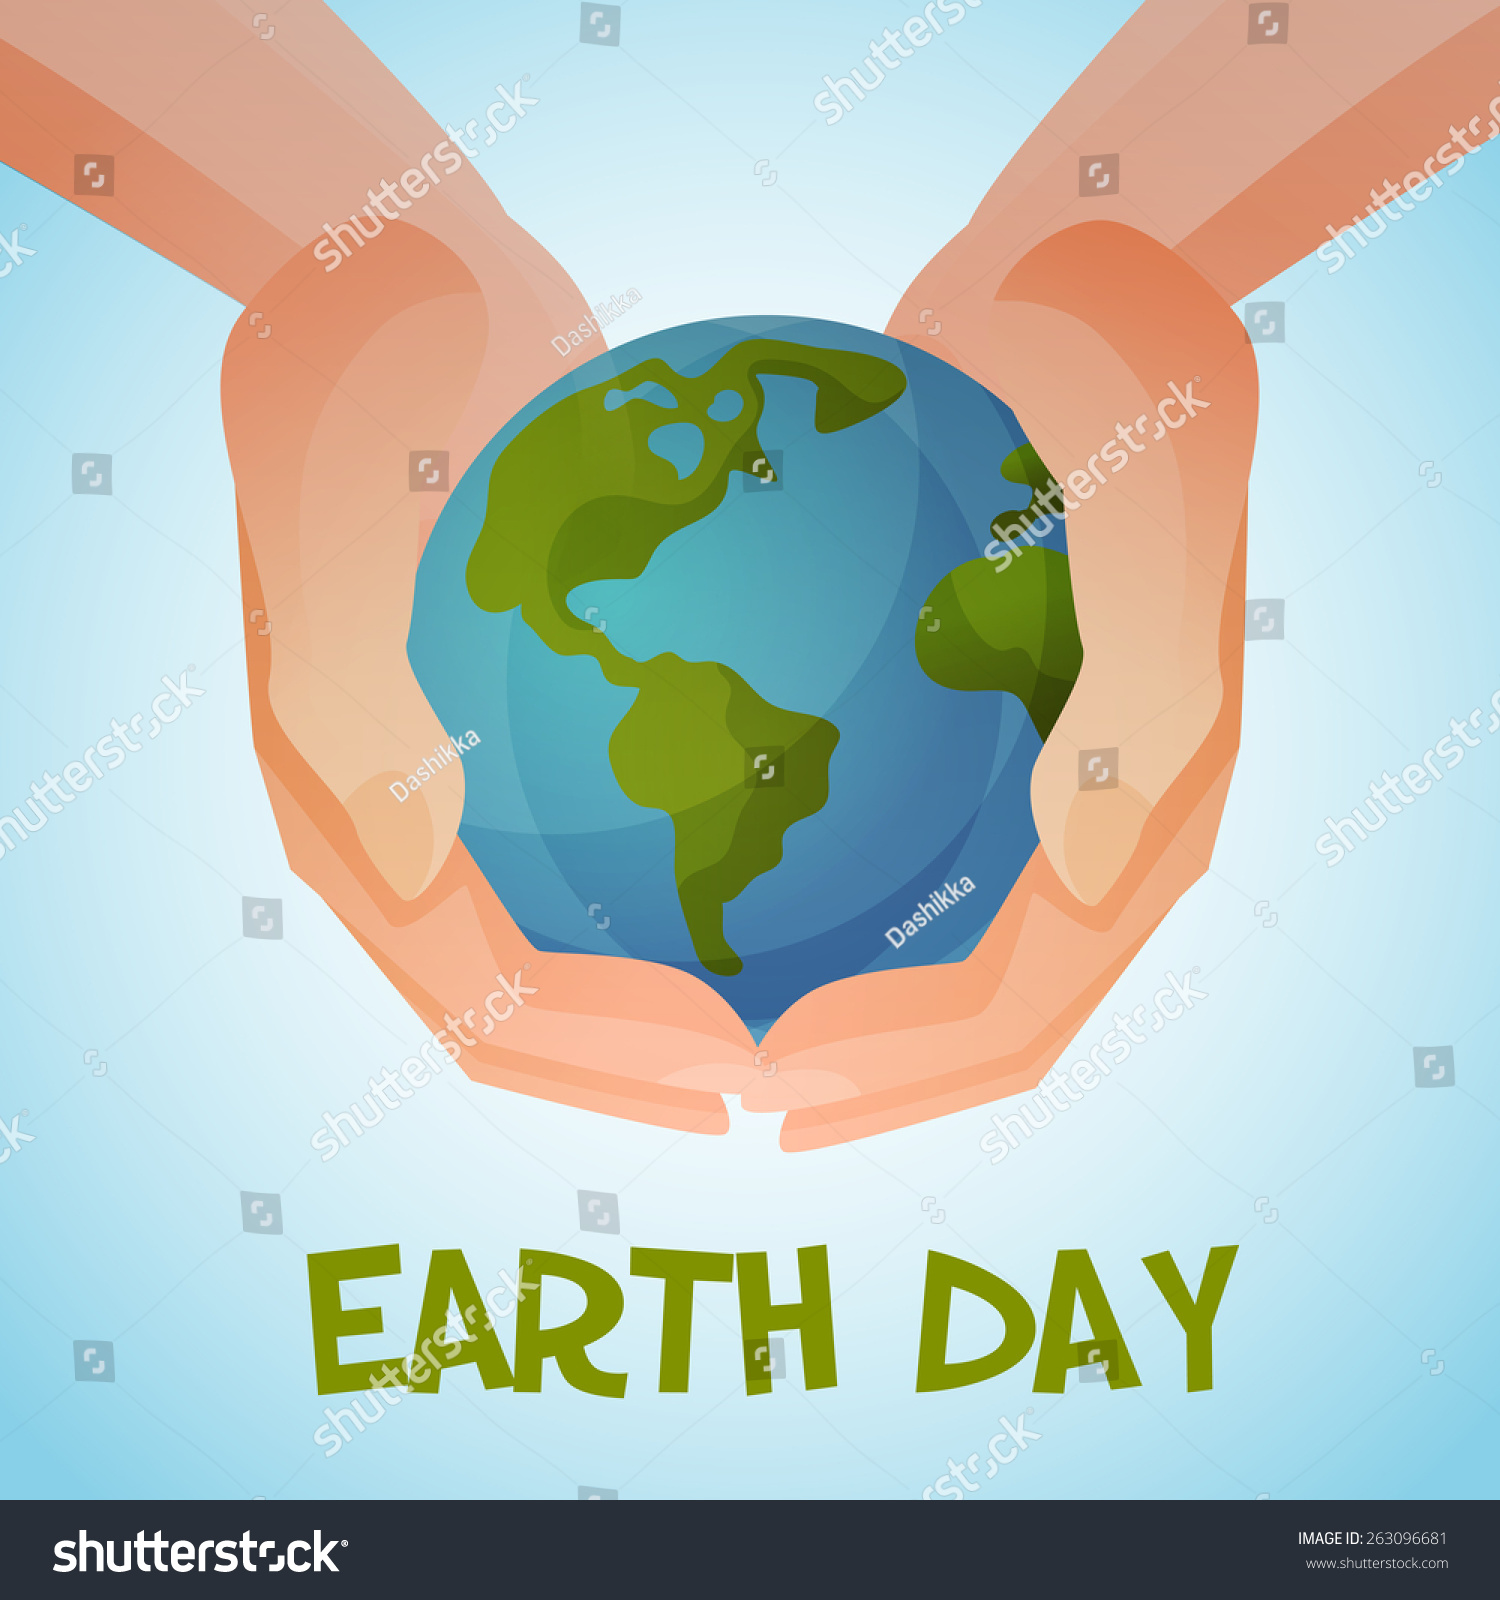 Earth Day Planet Our Hands Vector Stock Vector Royalty Free